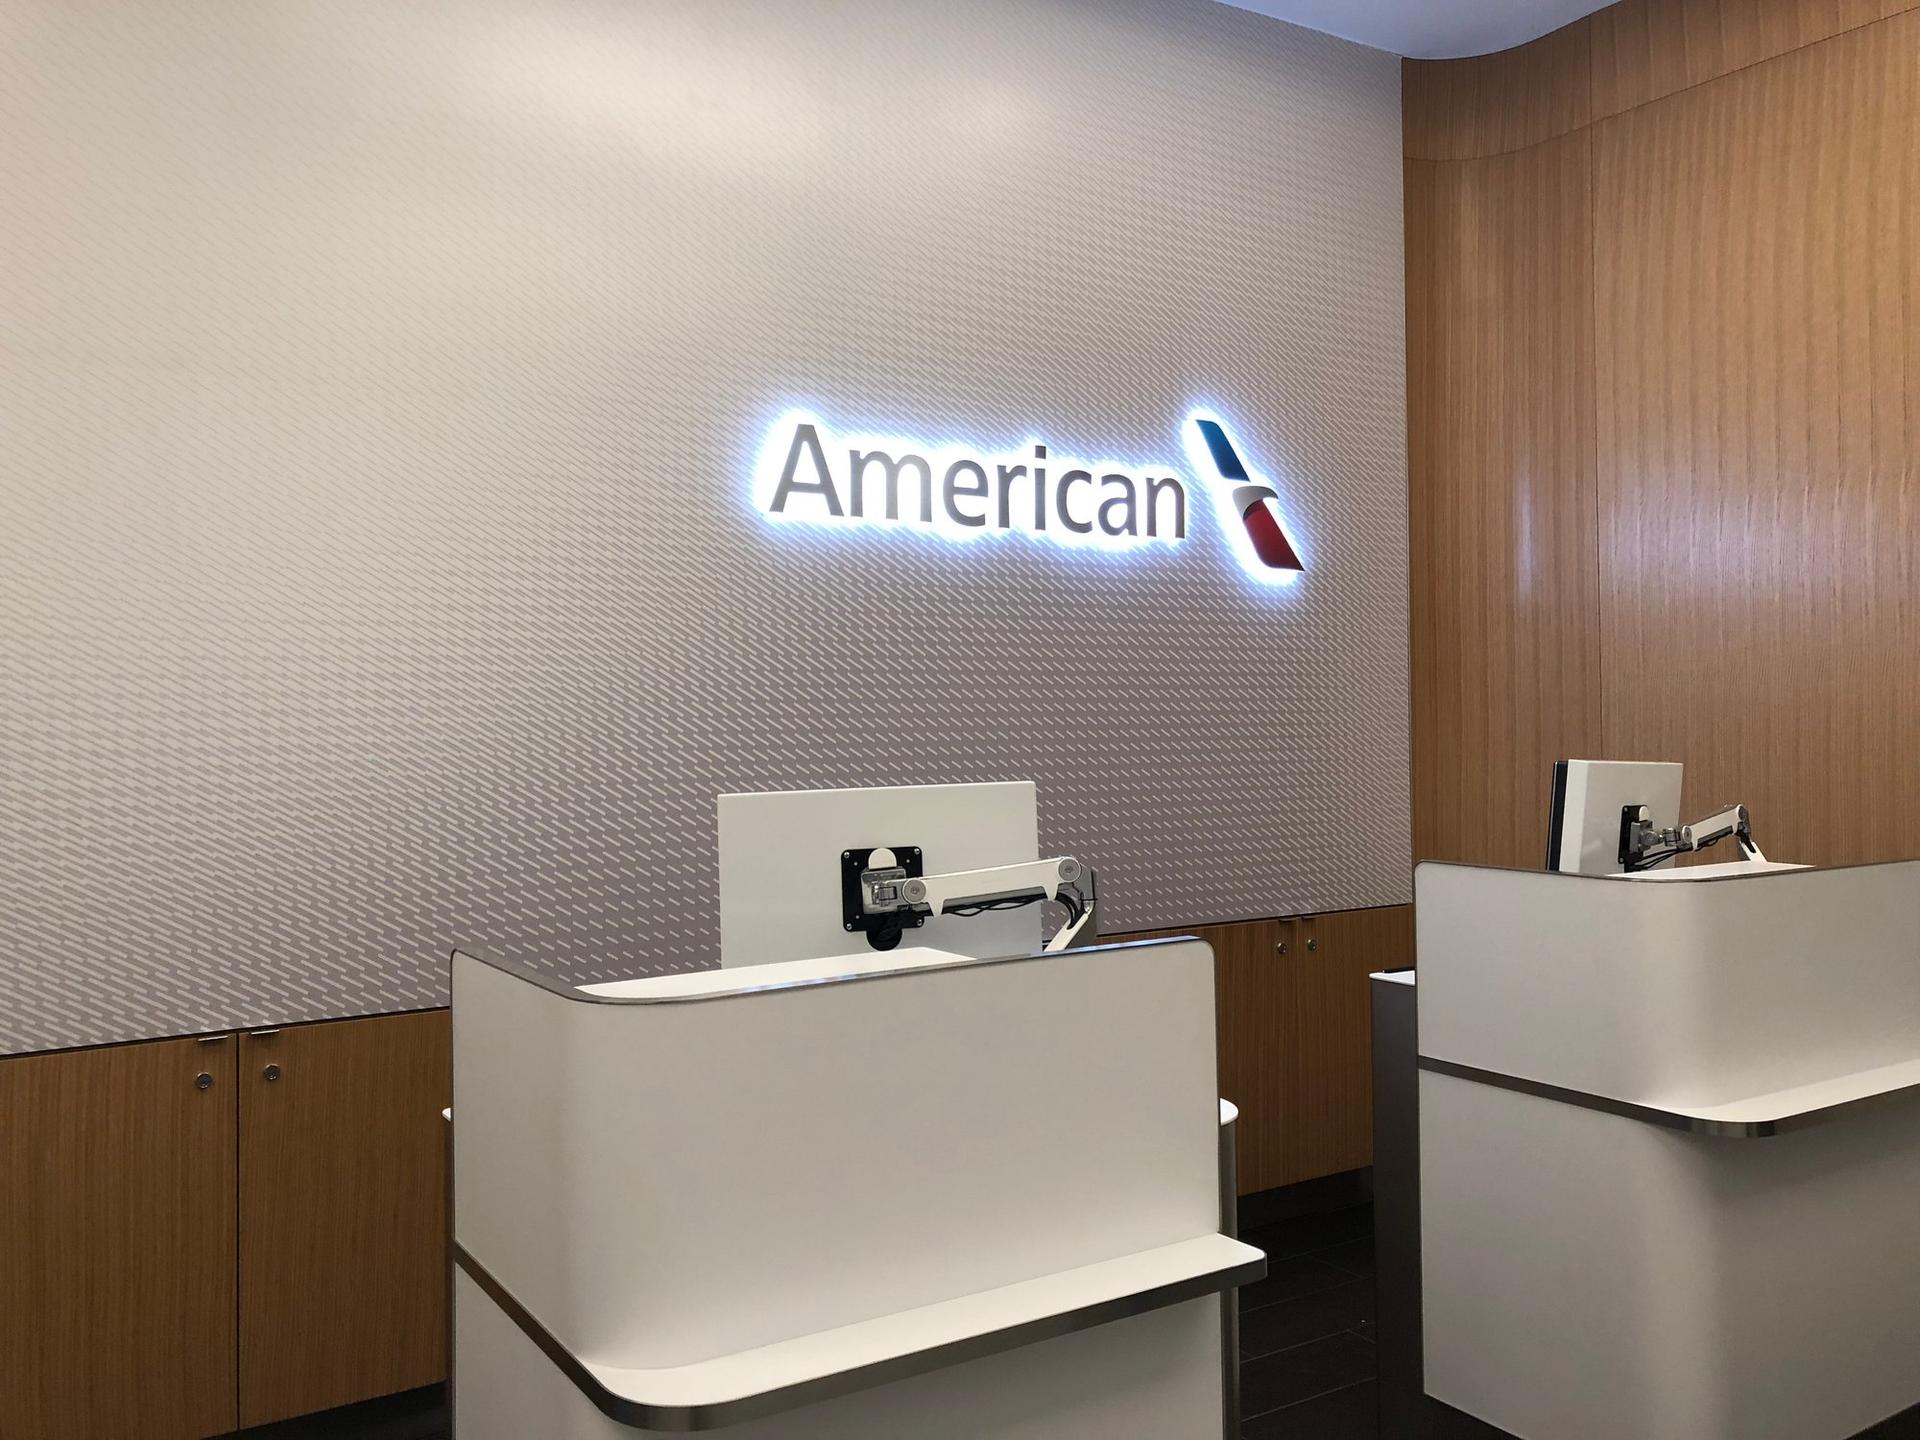 American Airlines Flagship Lounge image 2 of 65